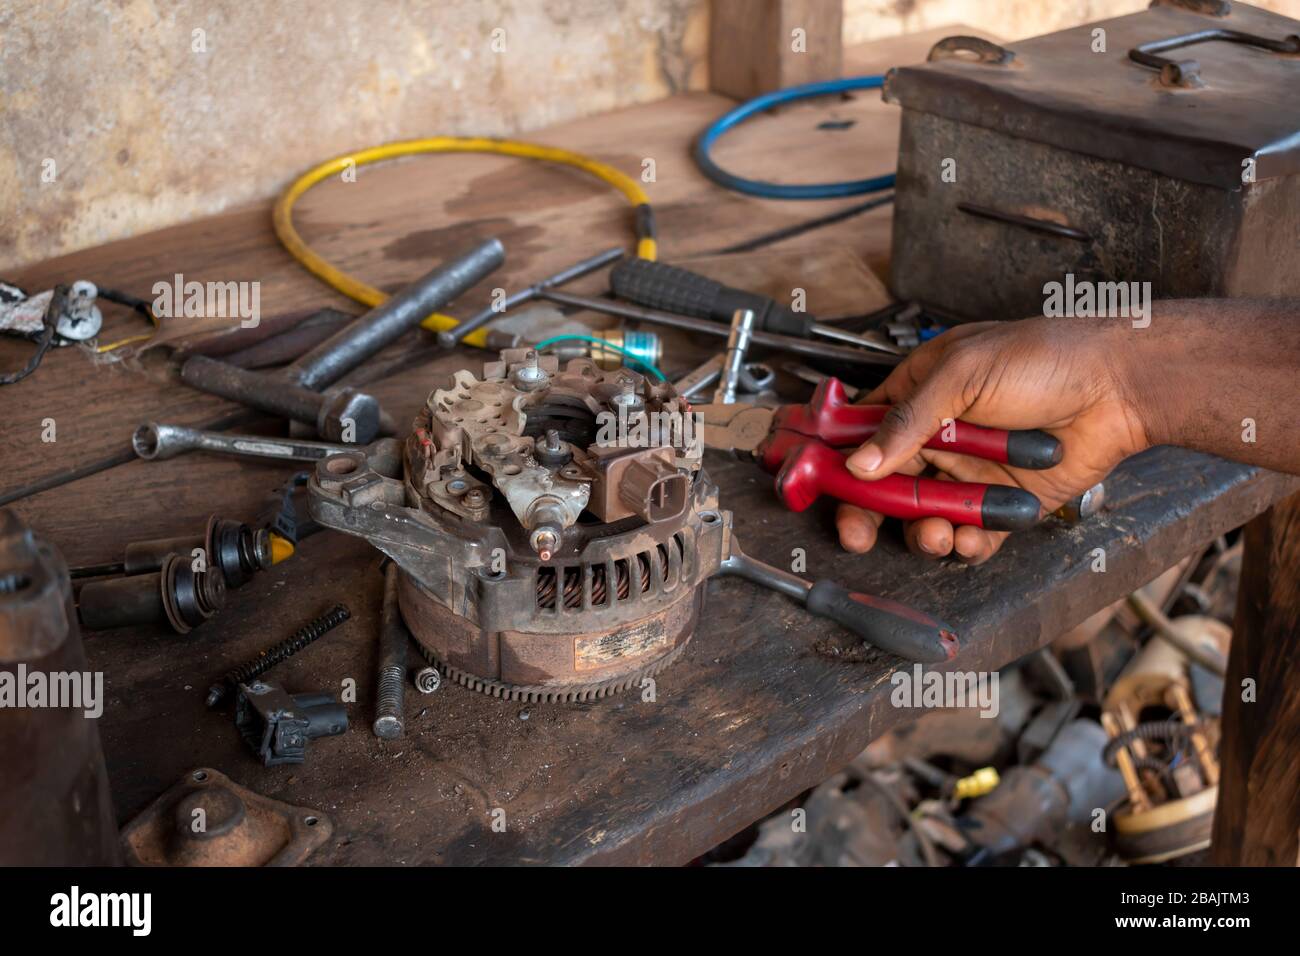 hand screwdriver spanner and tools on a mechanical table Stock Photo